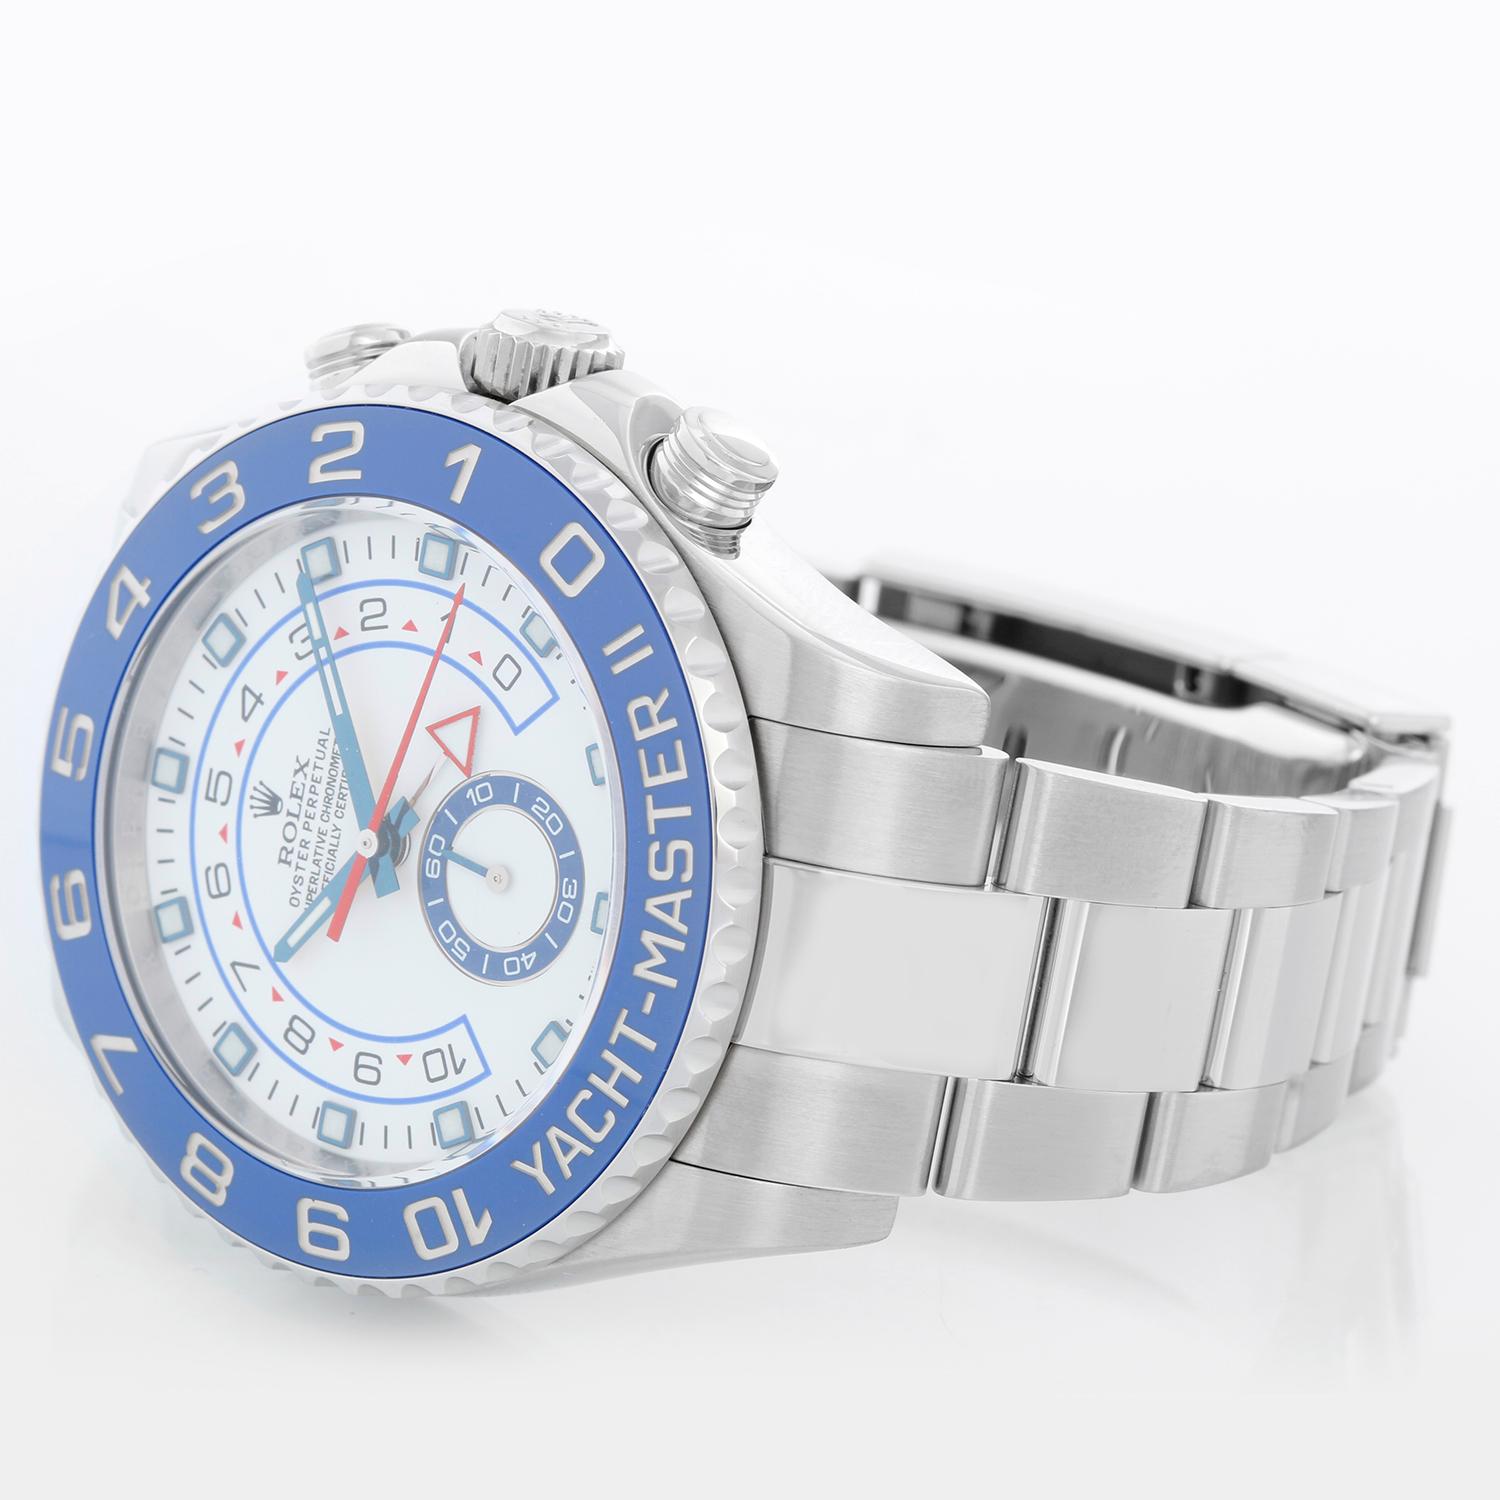 Men's Rolex Yacht-Master II Regatta Watch Stainless Steel Blue Bezel 116680 - Automatic winding, Regatta Chronograph, 31 jewels, sapphire crystal. Stainless steel case with rotatable Ring Command bezel with blue insert (44mm diameter). White dial